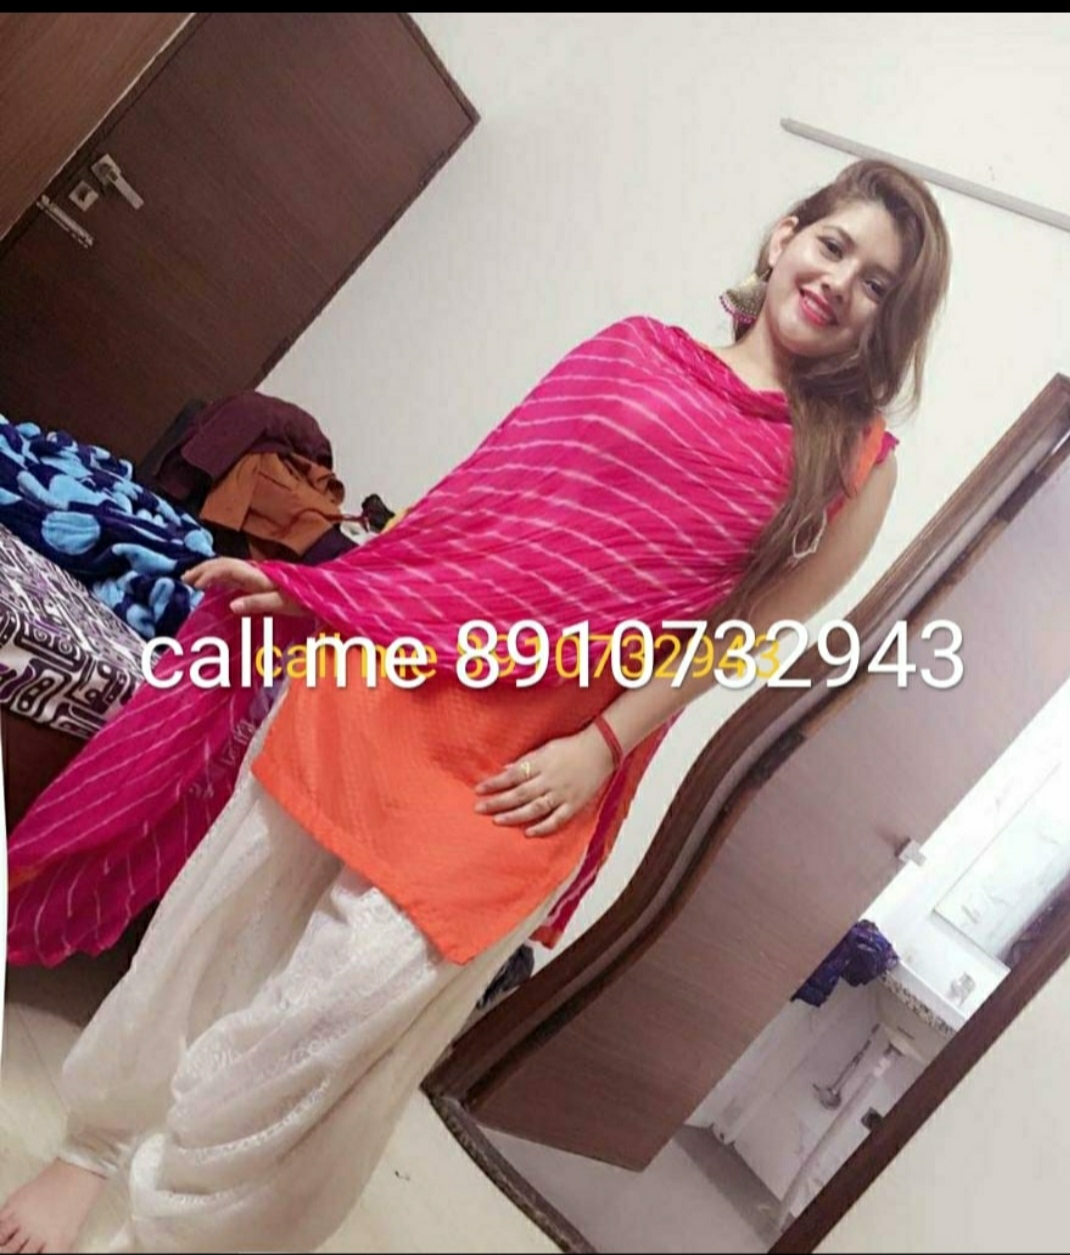 Low price escorts service available anytime  jshd